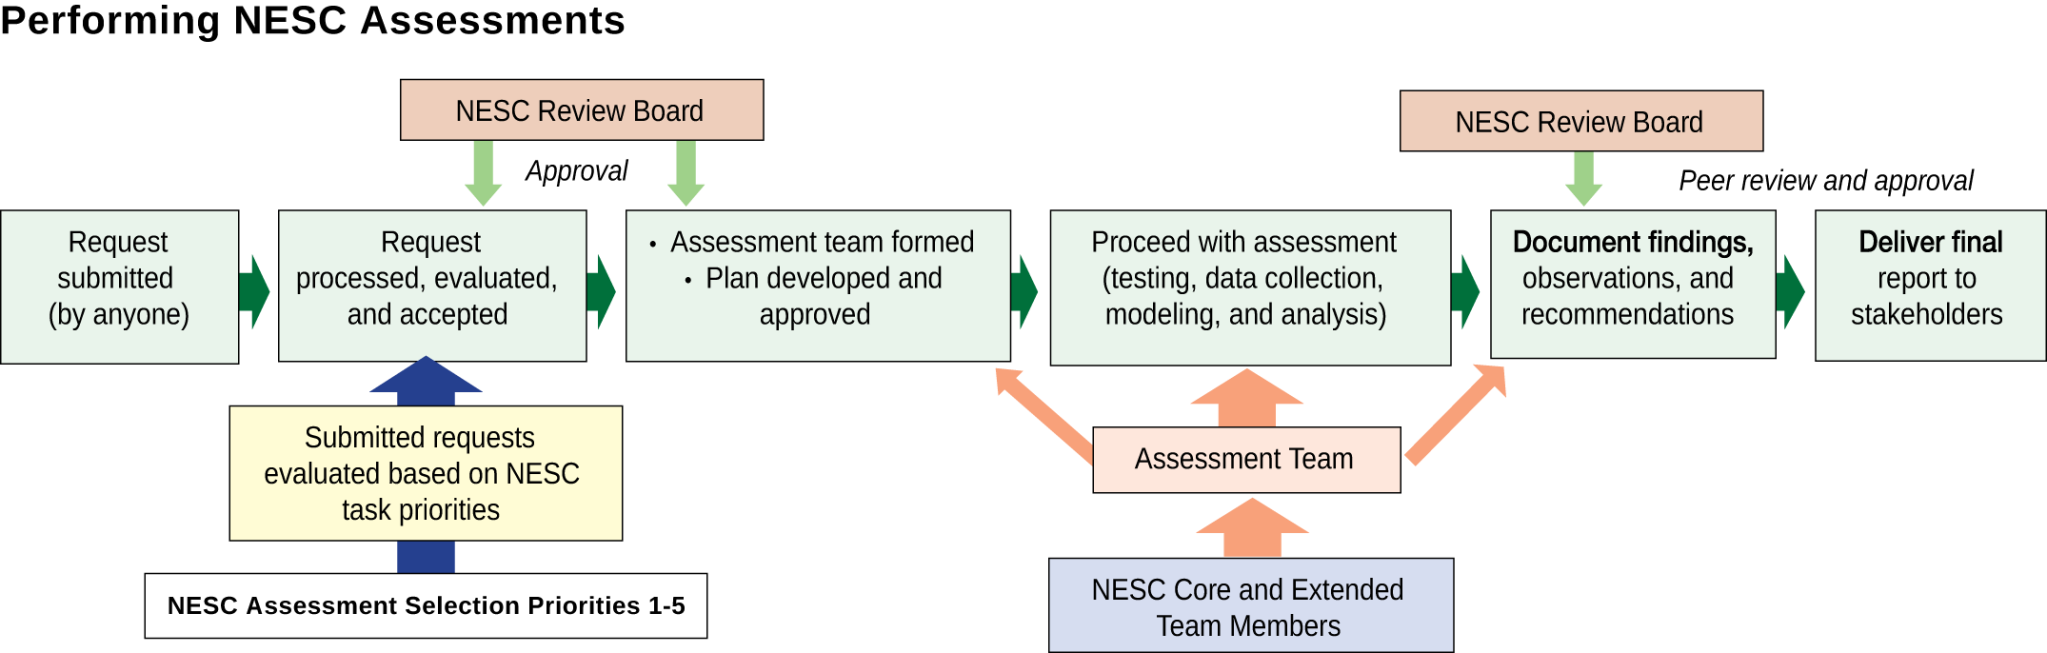 performing_nesc_assessments.png